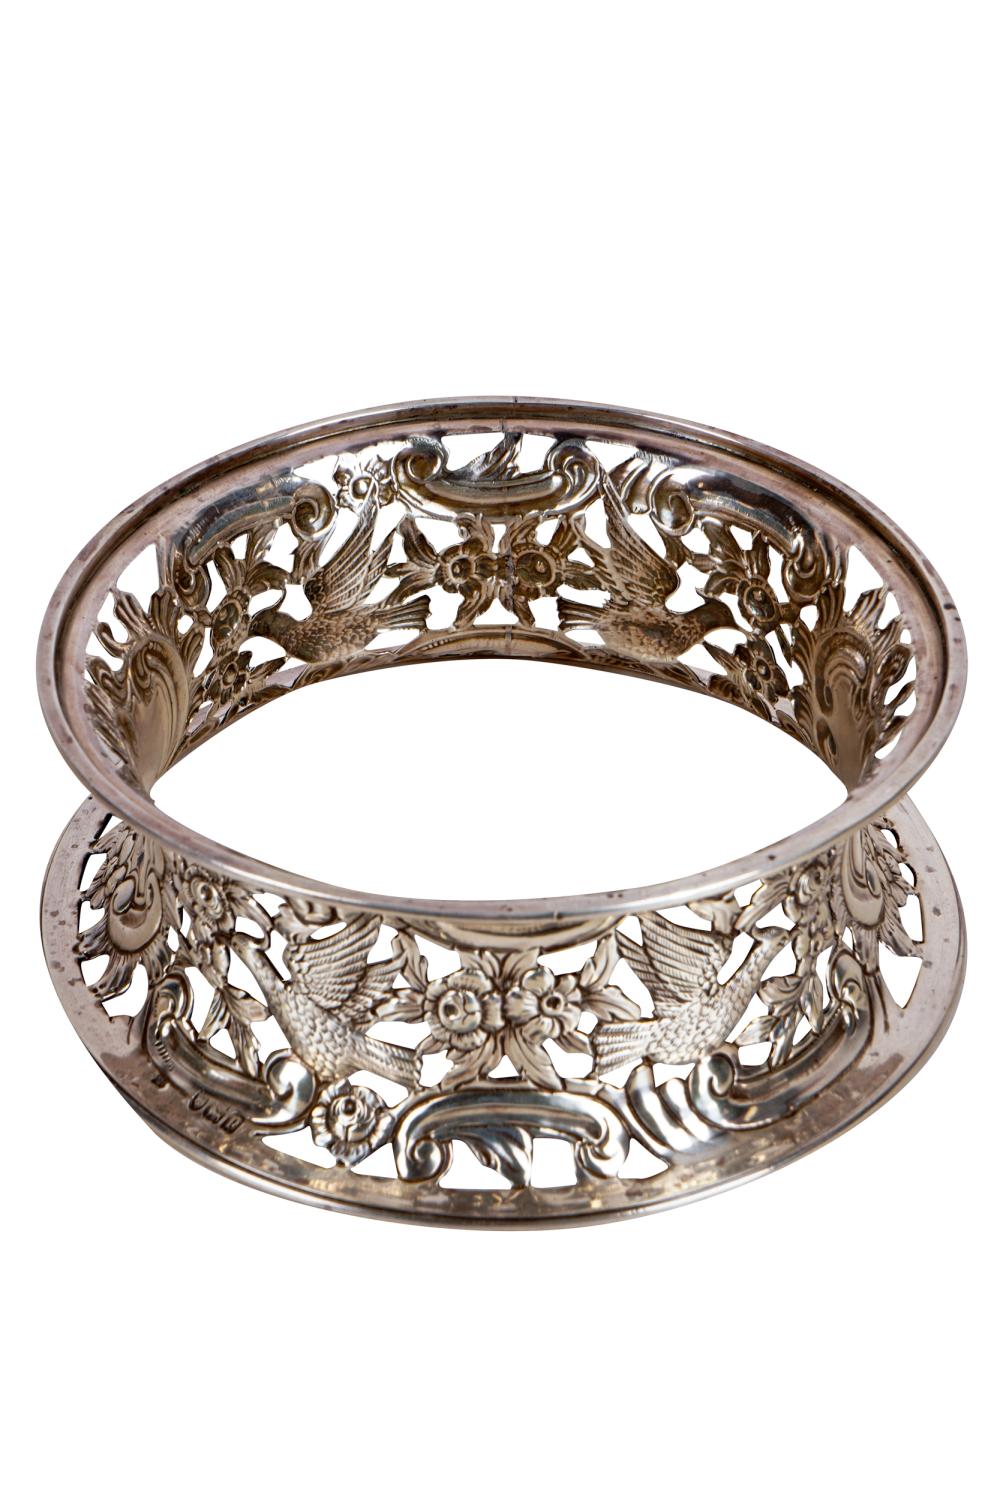 ENGLISH SILVER RETICULATED STANDwith 3324e7